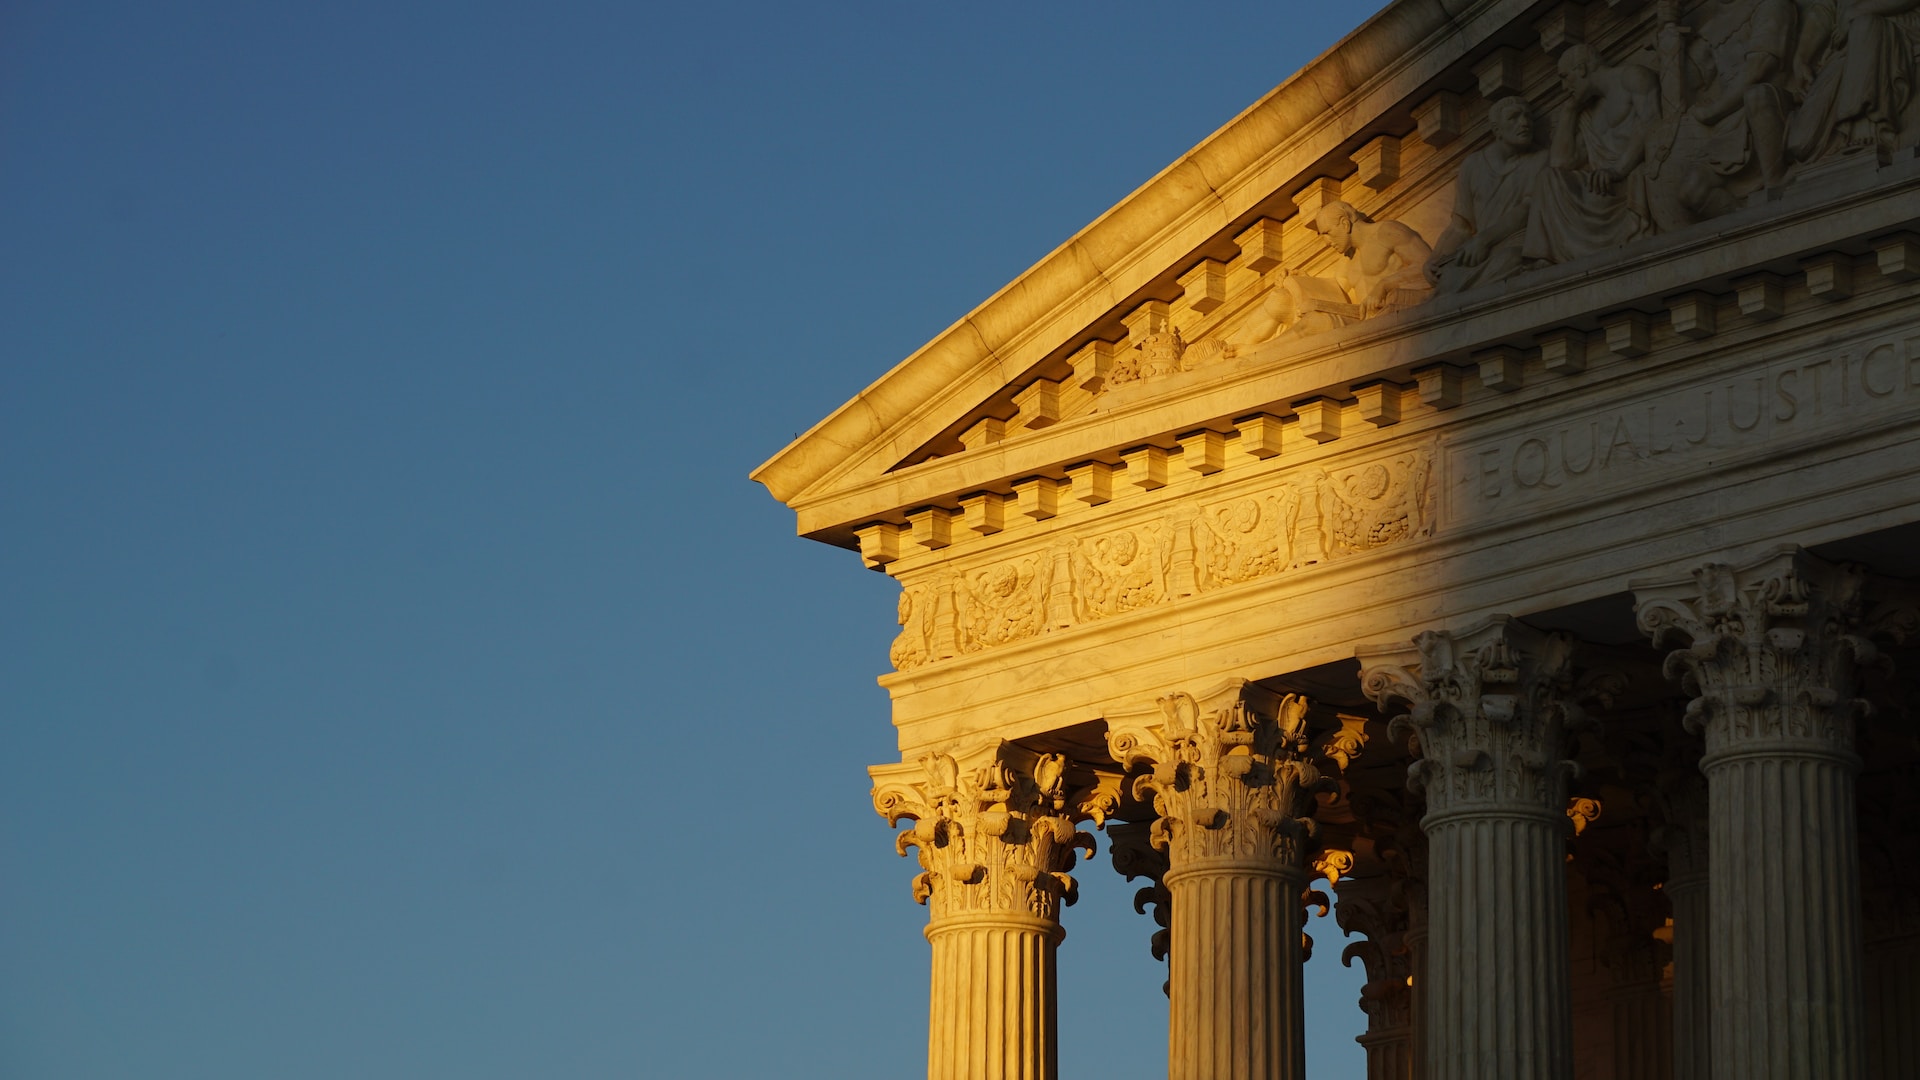 Could SEC v. Jarkesy Be The SCOTUS Case That Brings Down The Administrative State?